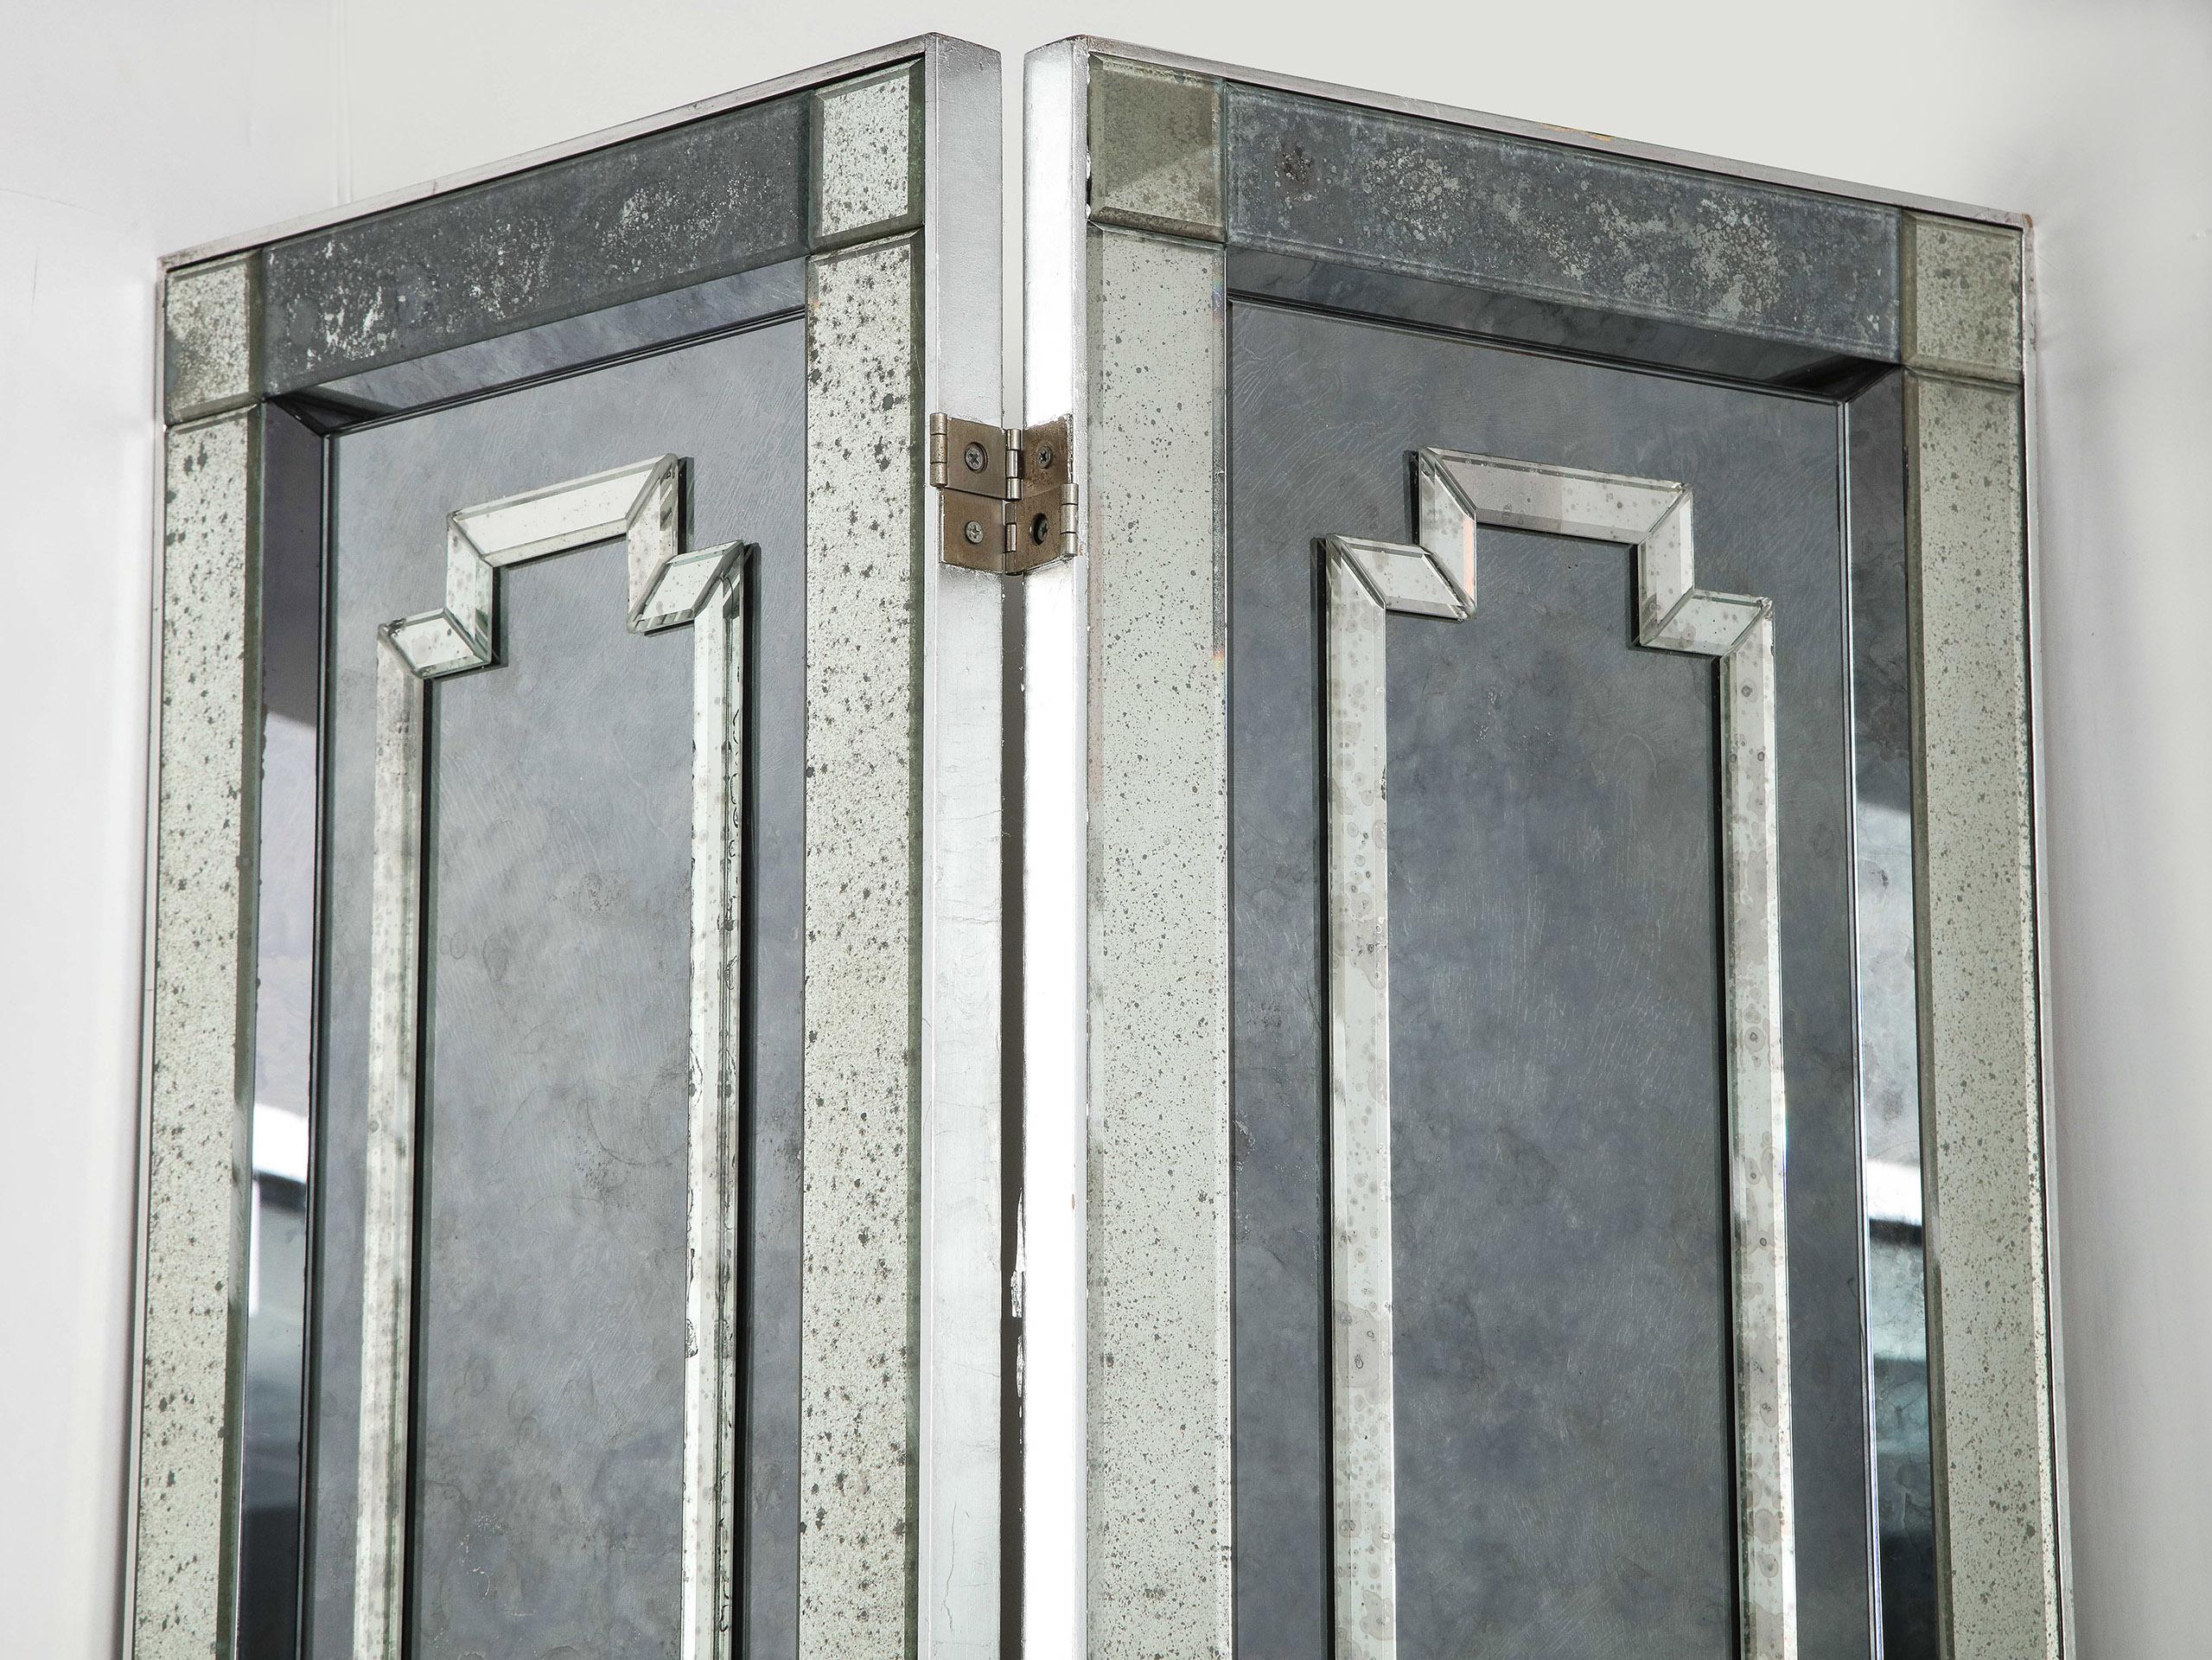 Midcentury 8-panel antiqued mirror screen

Each panel having a neoclassical design of intricately layered mirror appliqués on top of the mirrored base panel. The back painted gray

Each panel @15